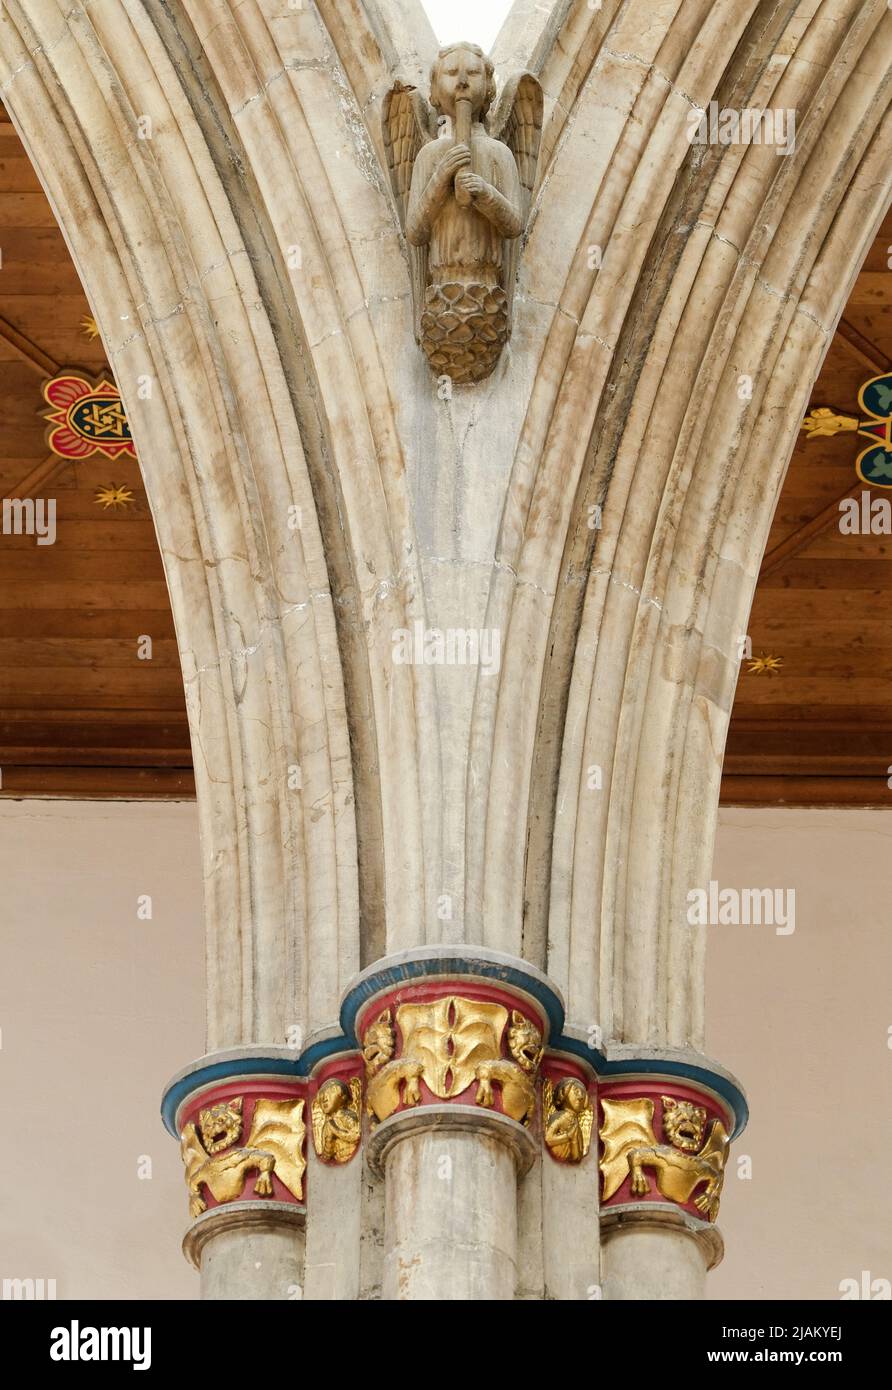 Hull, East Yorkshire, UK. May 21, 2022 An early stone carving of an angel playing music, high on arched pillars with decorative gilded emblems below Stock Photo